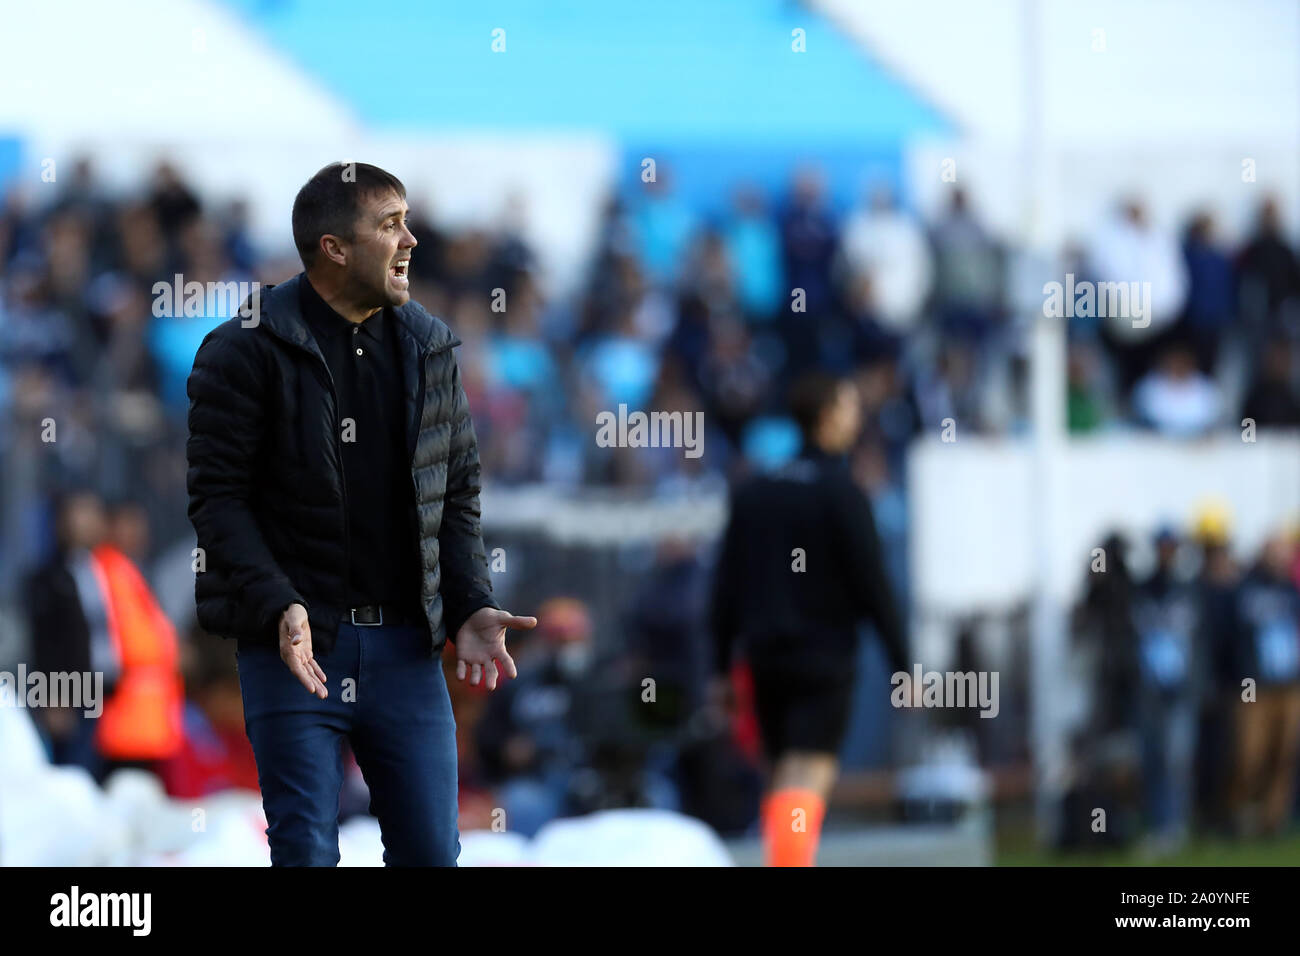 Buenos Aires, Argentina - September 22, 2019: Eduardo Coudet (Racing Club) doing gestures in a match in Buenos Aires, Argentina Stock Photo